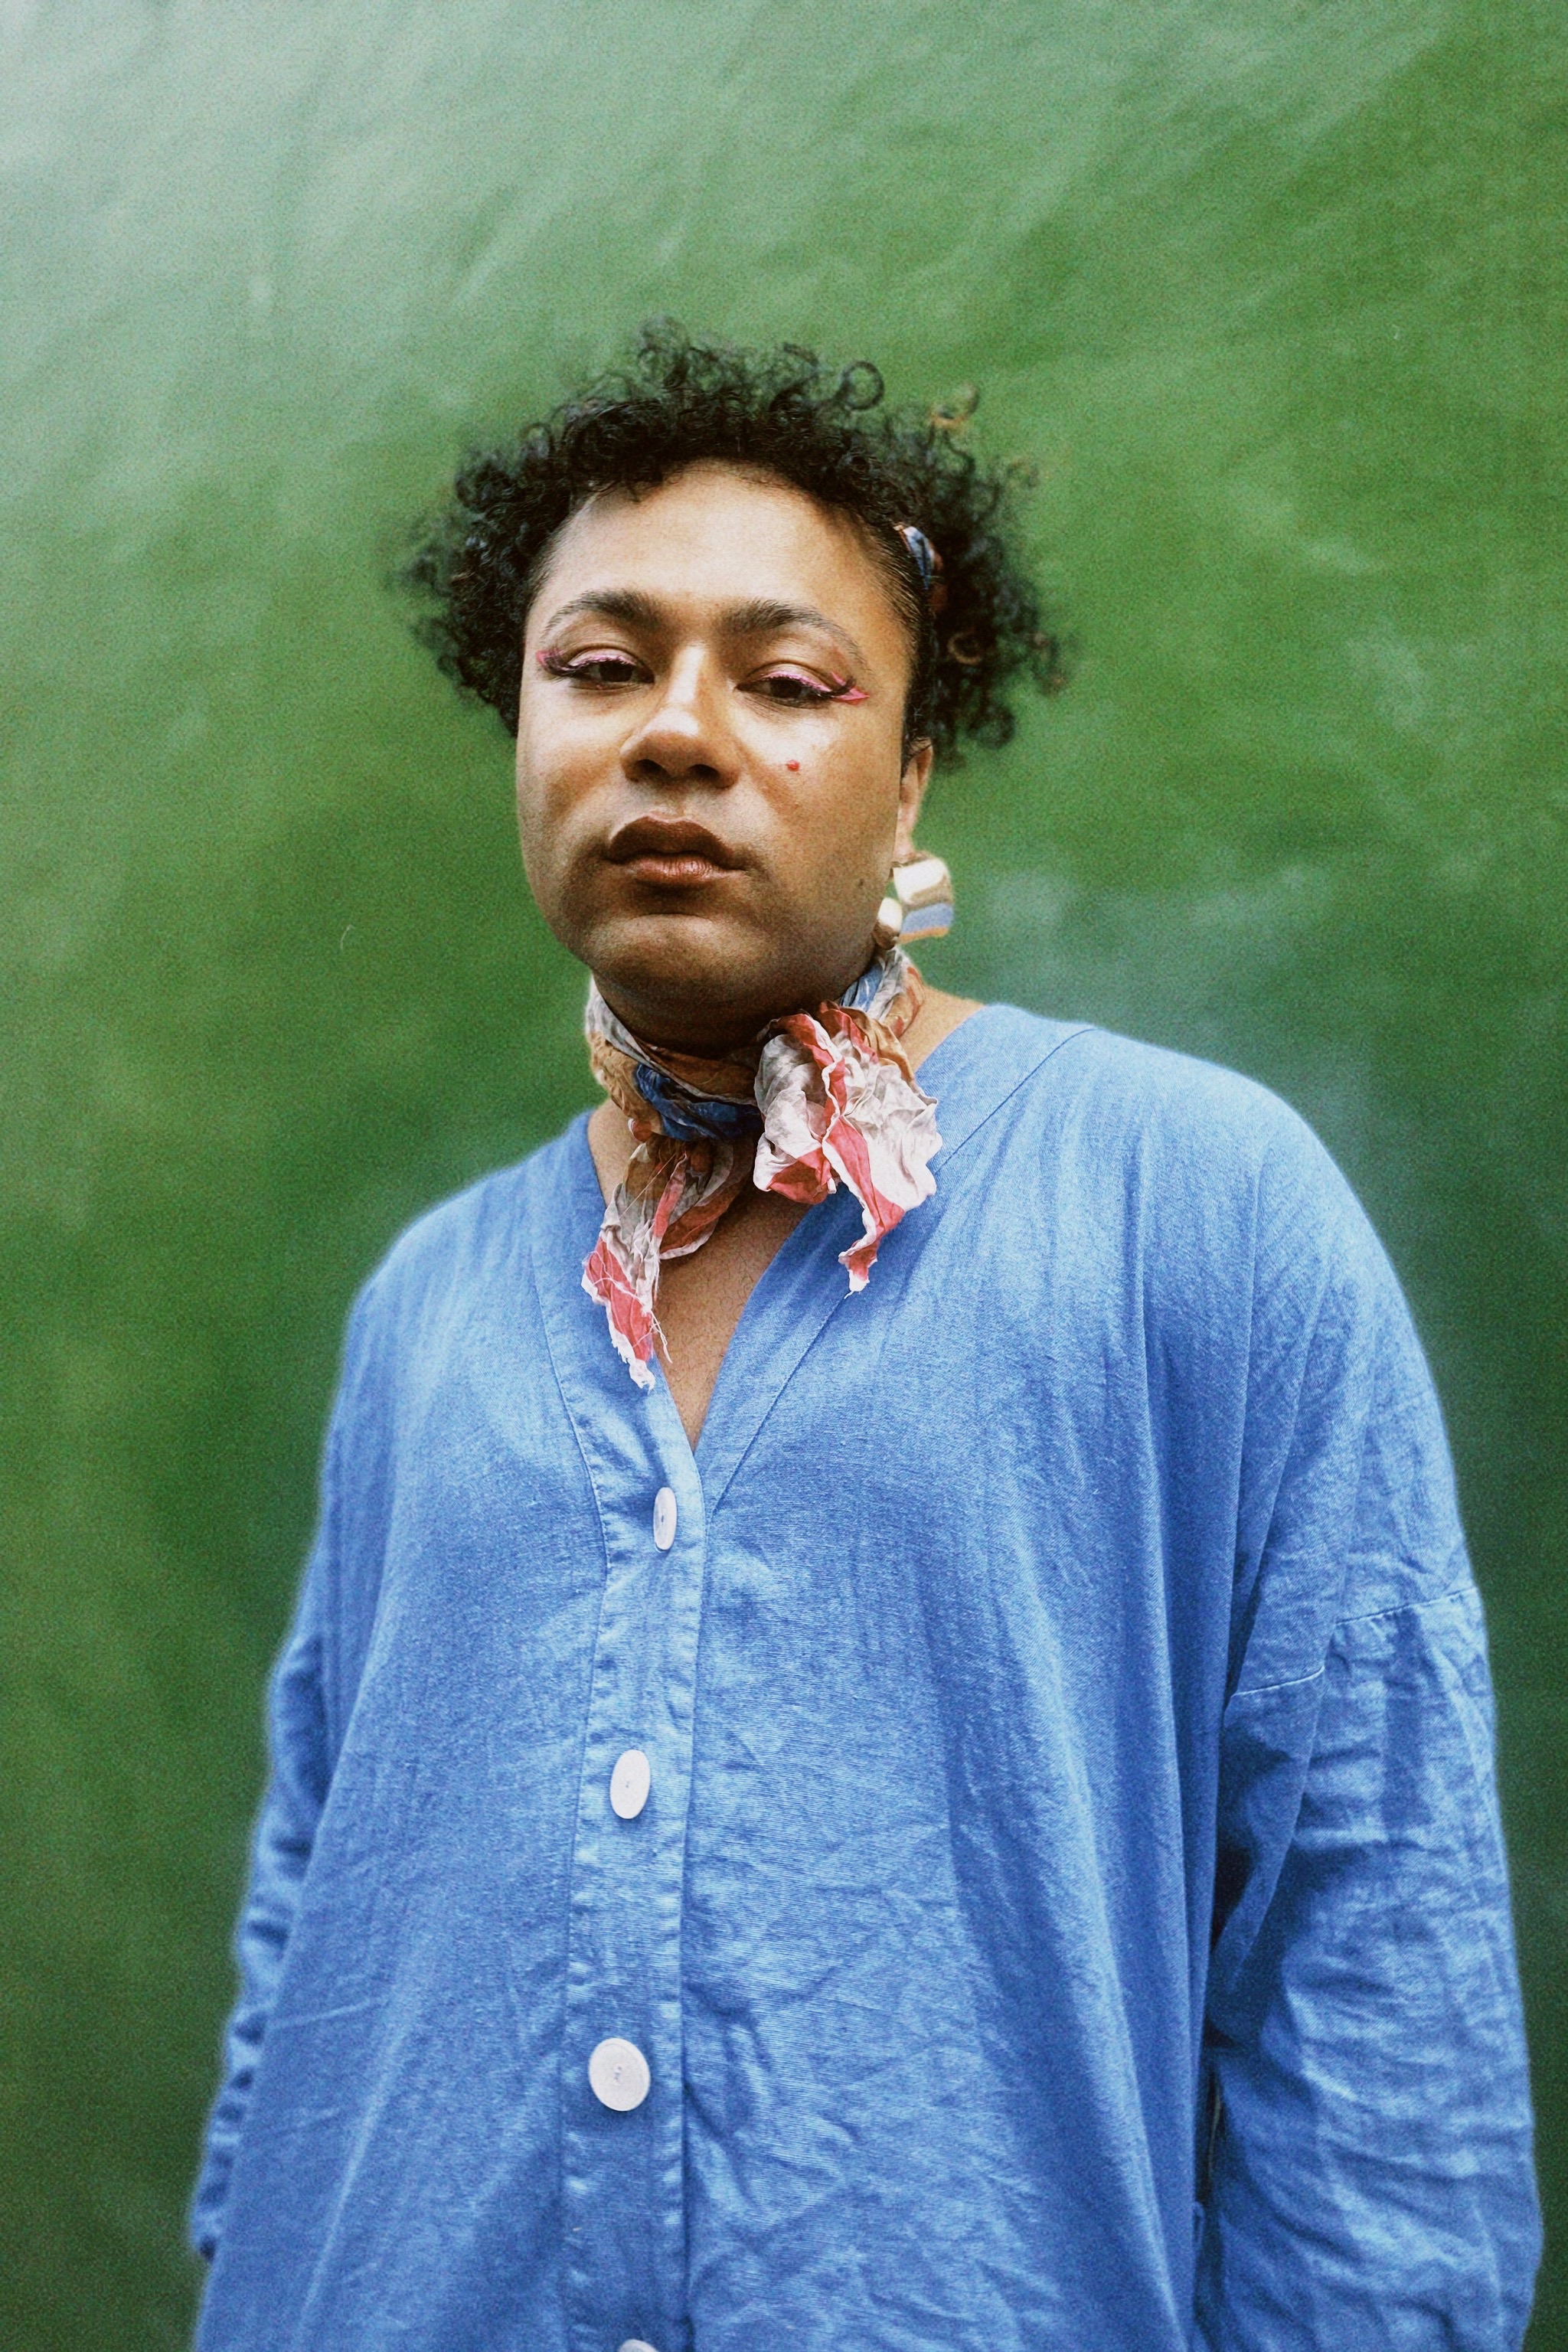 Trans woman with dark skin and curly hair wears colourful neck tie and blue shirt against a frosted green backdrop.